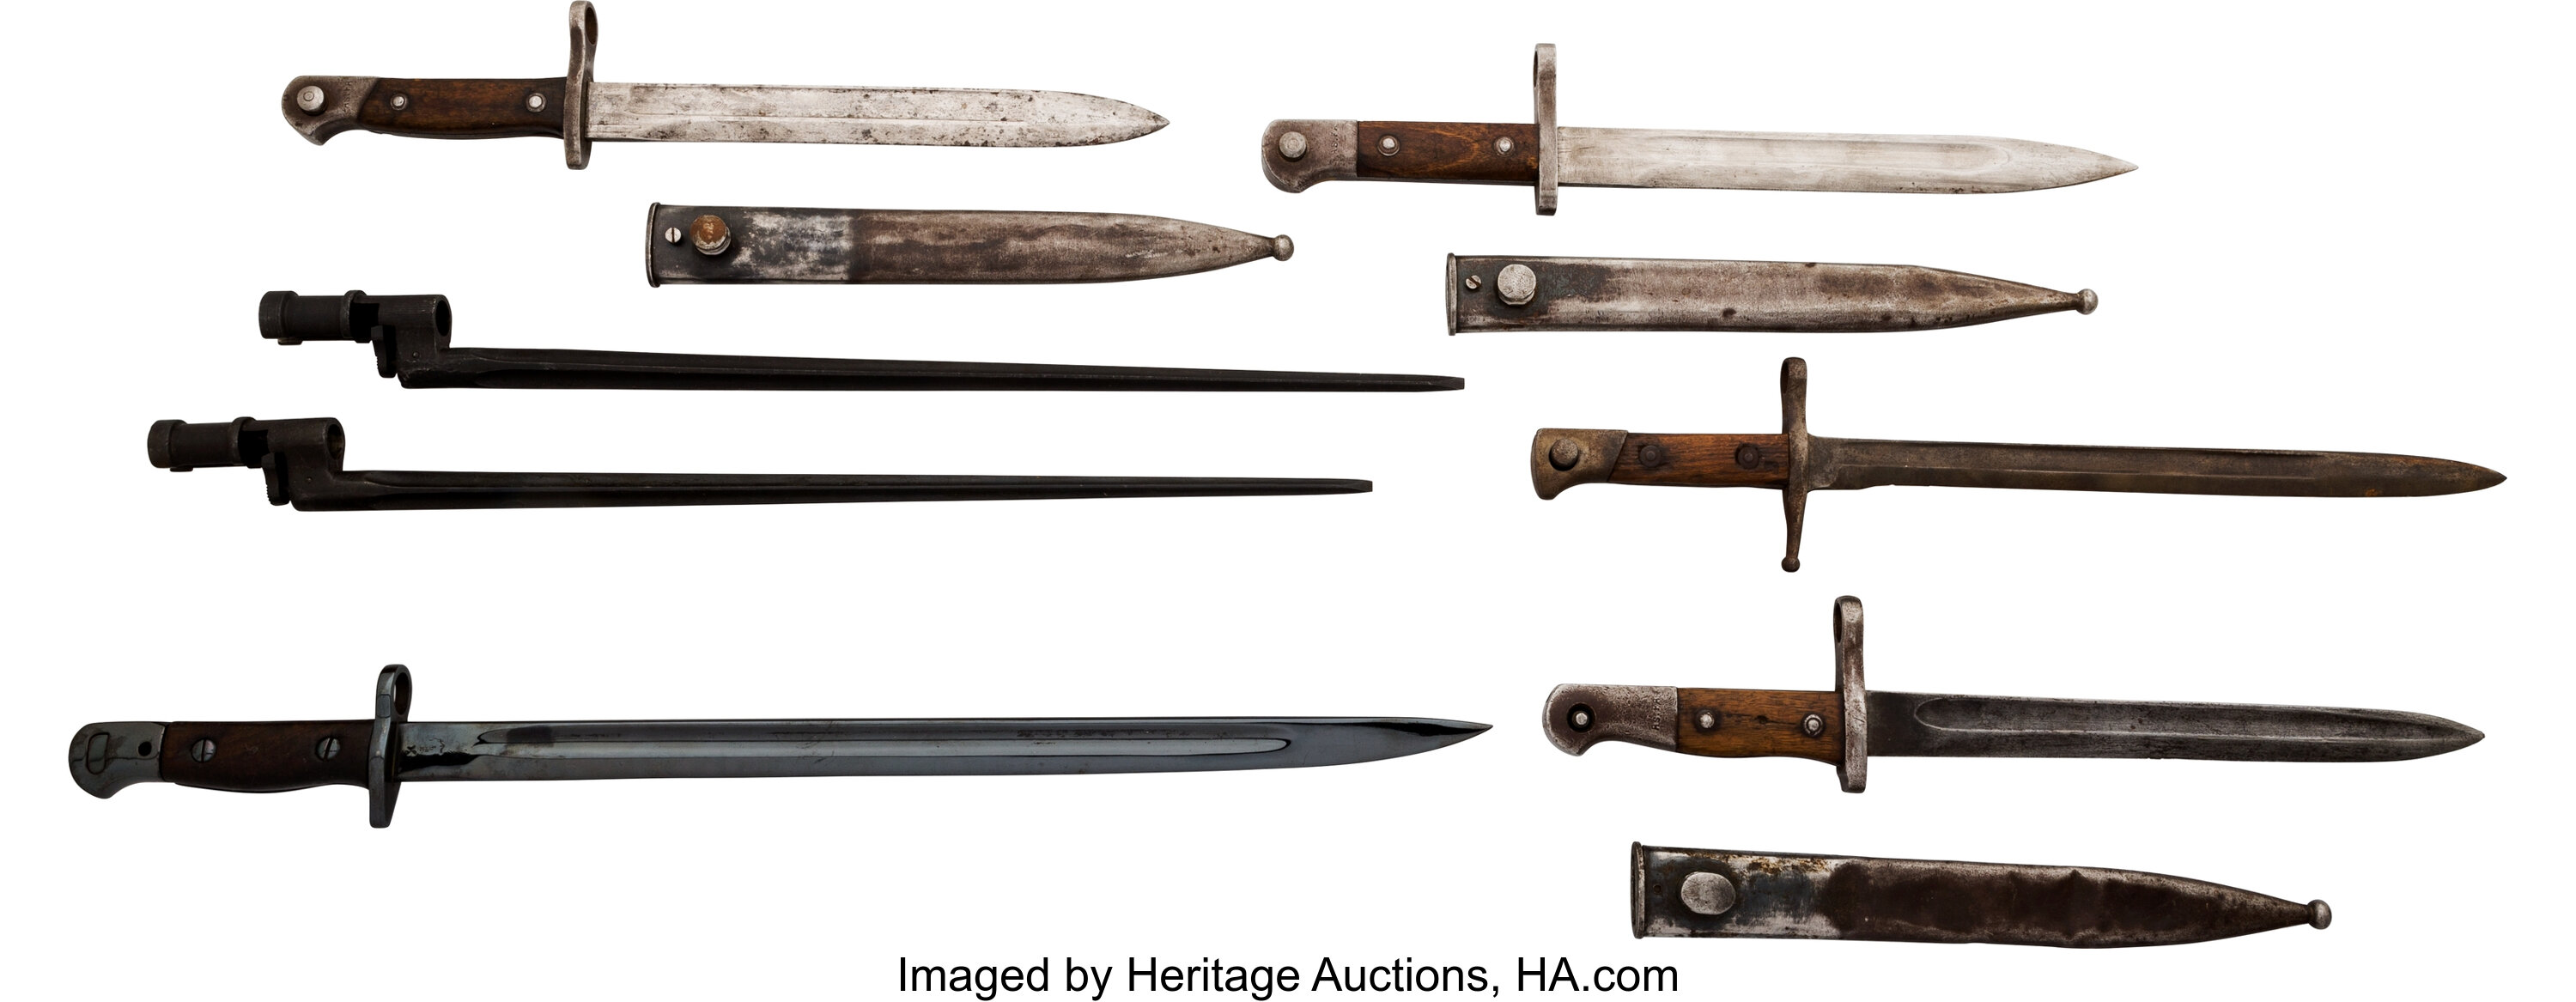 Lot Of Seven Military Bayonets Total 7 Items Edged Weapons Lot Heritage Auctions